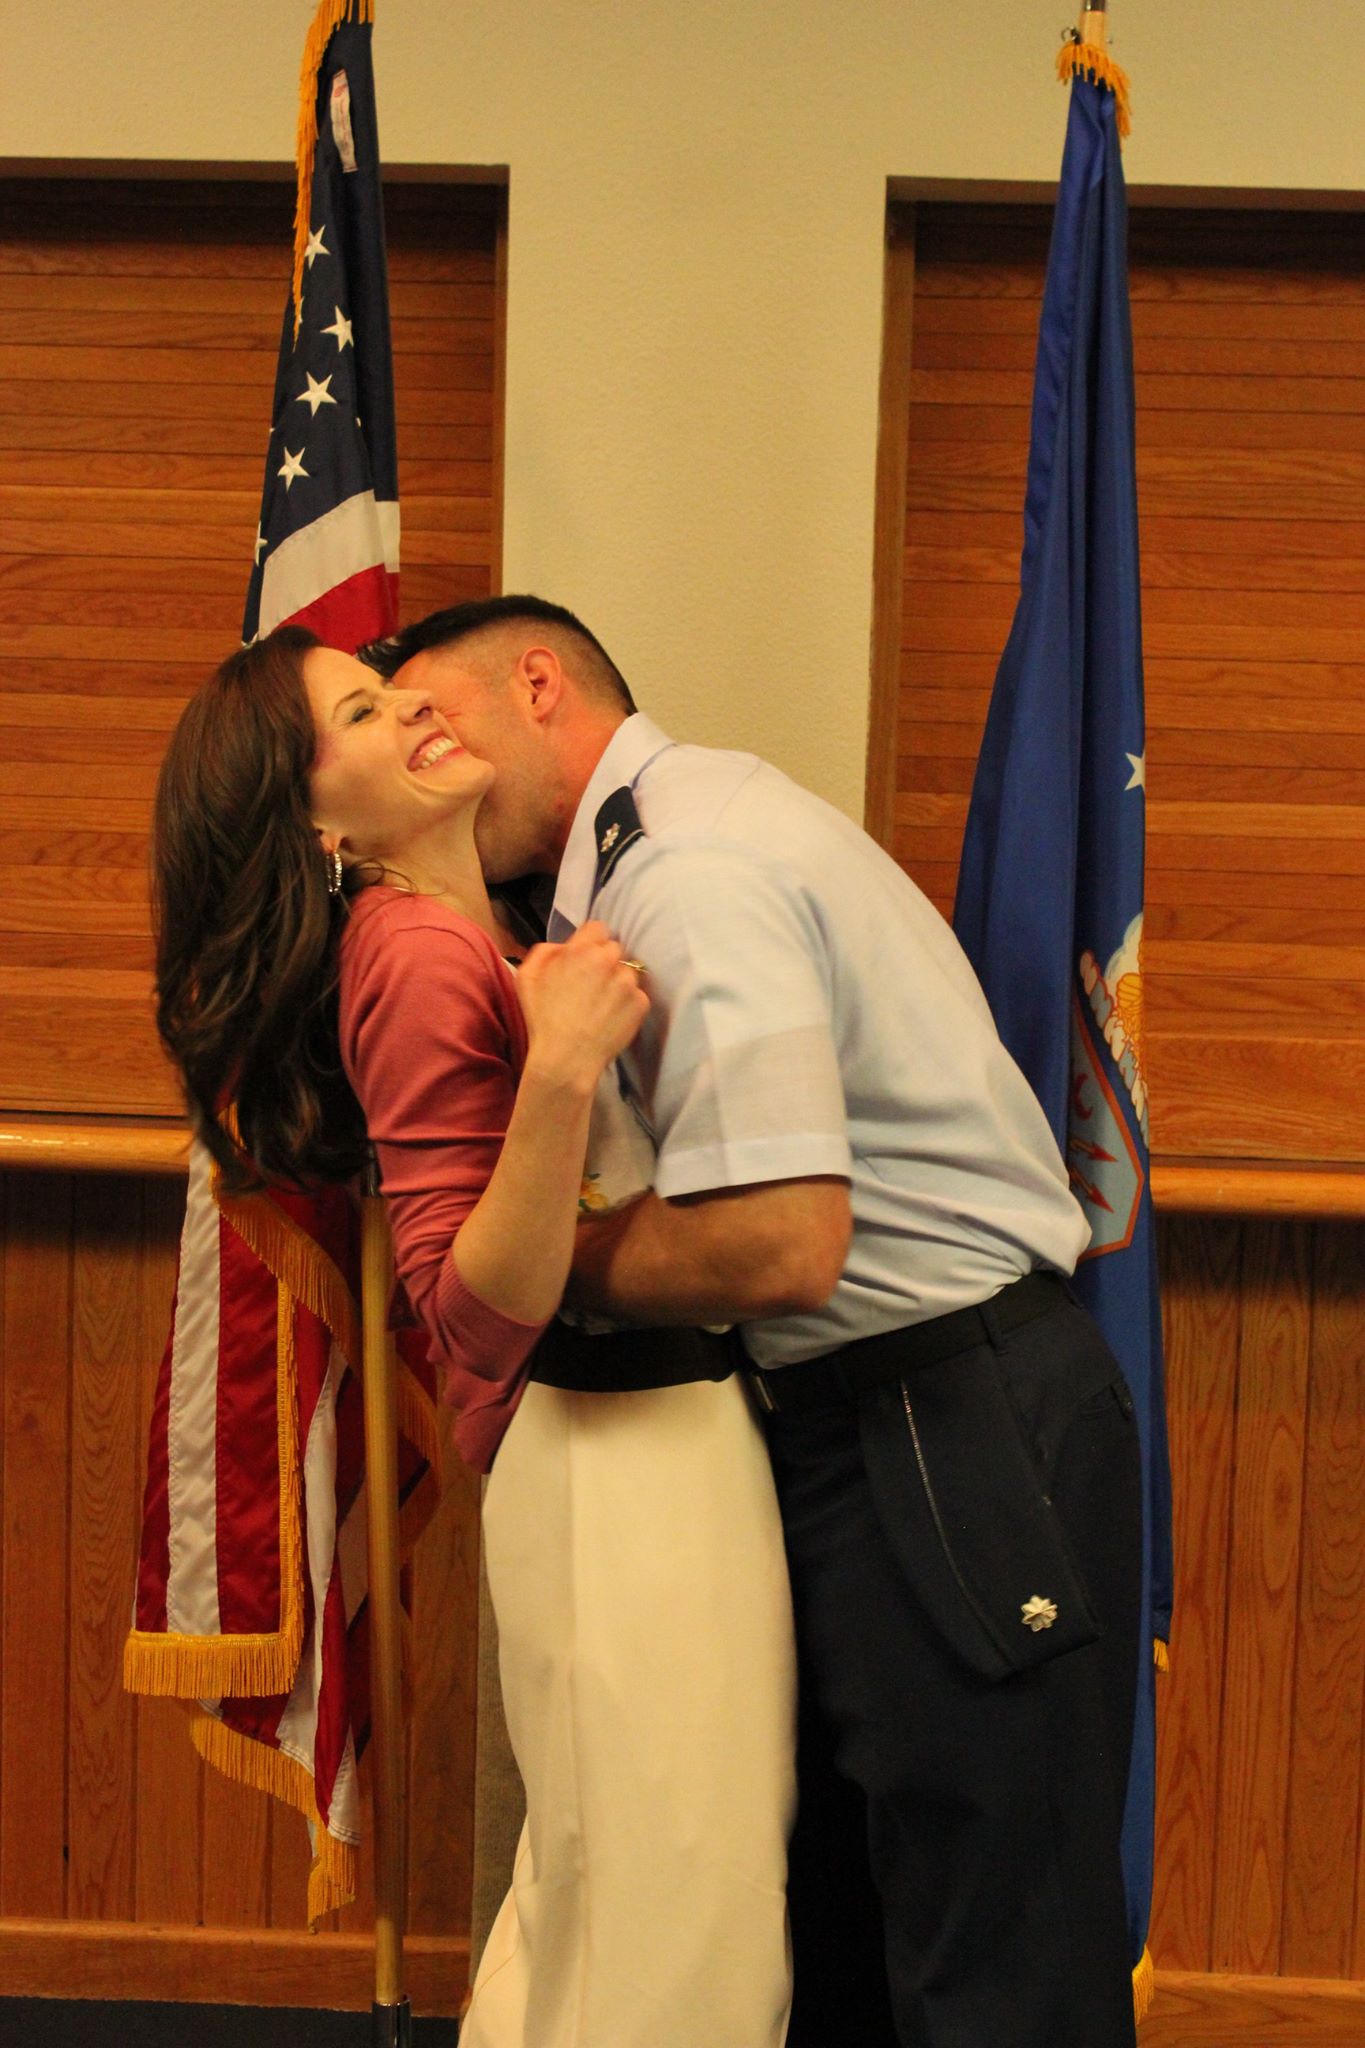 So What’s It Like Being A Catholic Military Spouse?